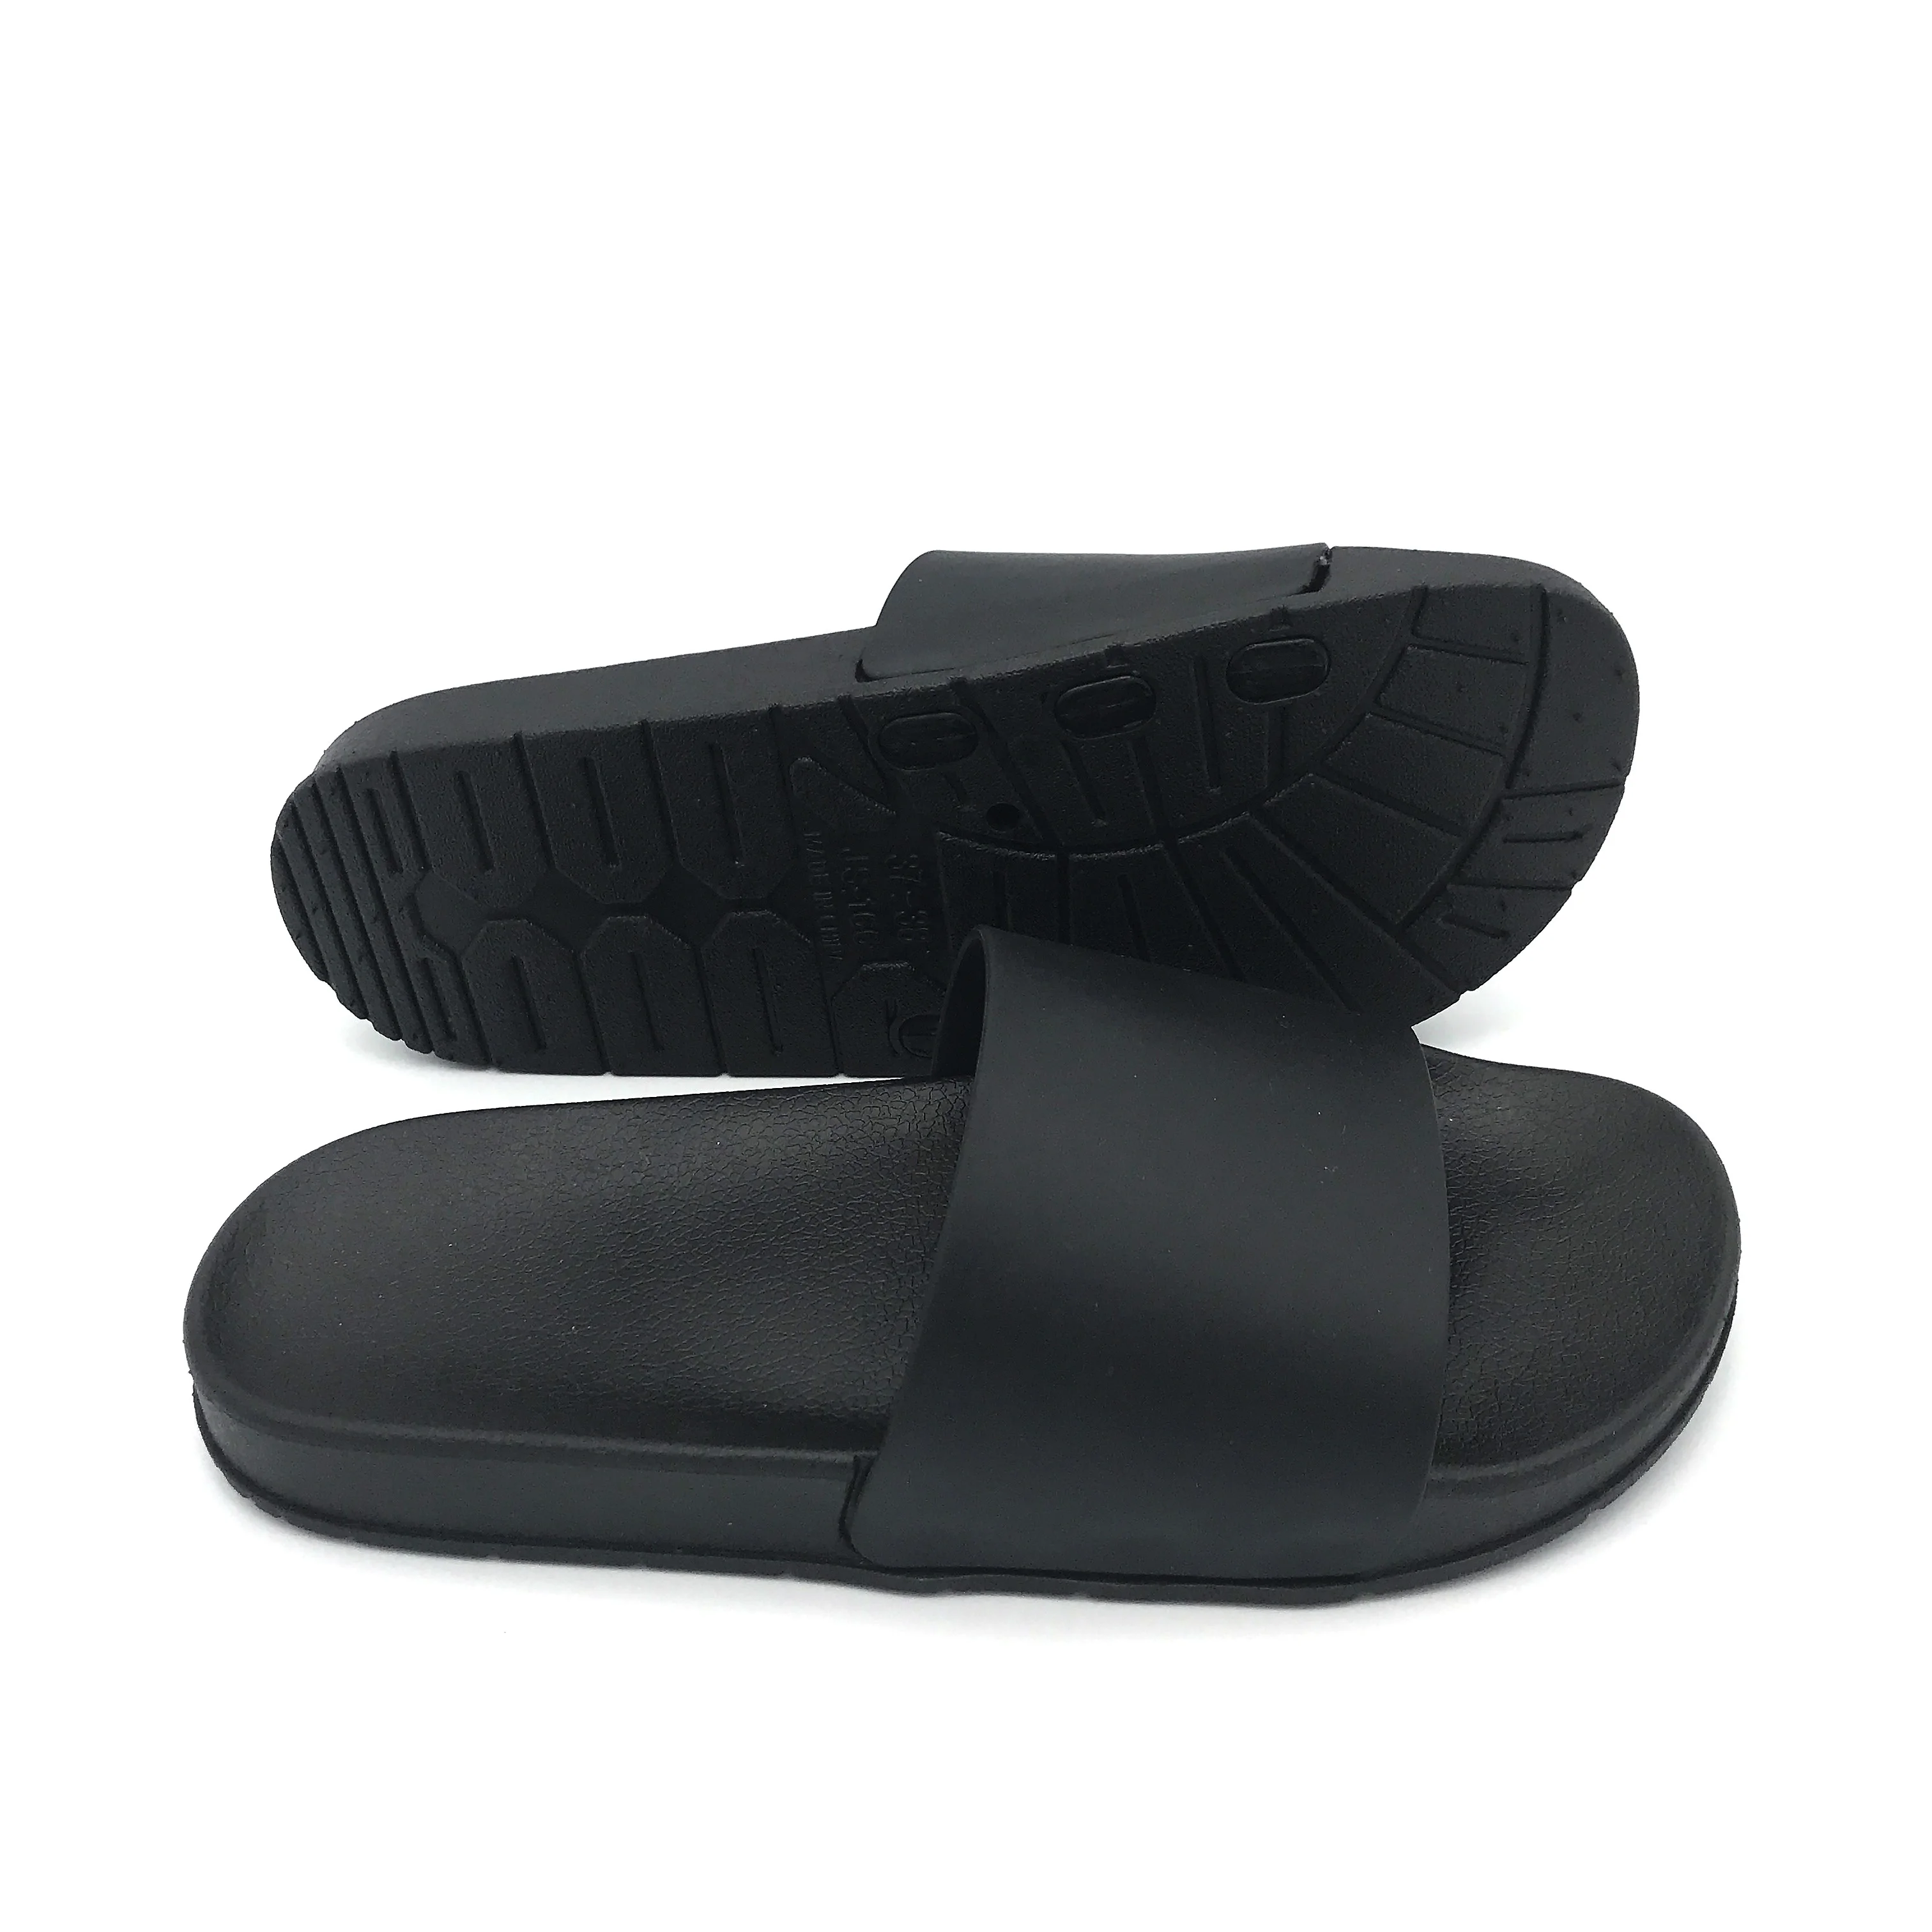 insulated slippers mens